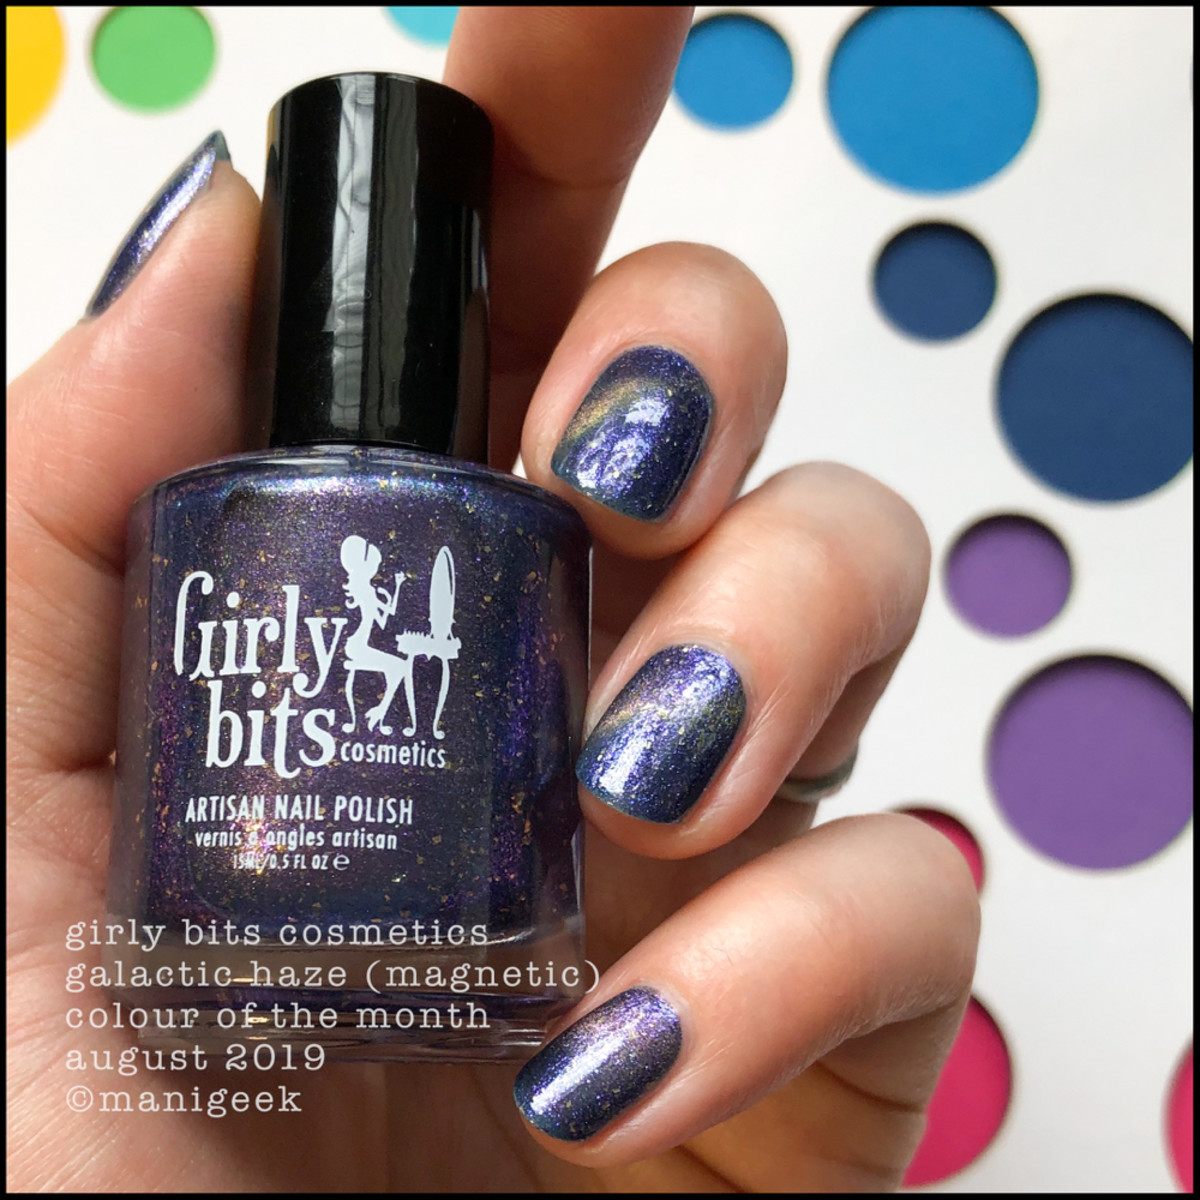 Girly Bits Galactic Haze Magnetic - COTM August 2019